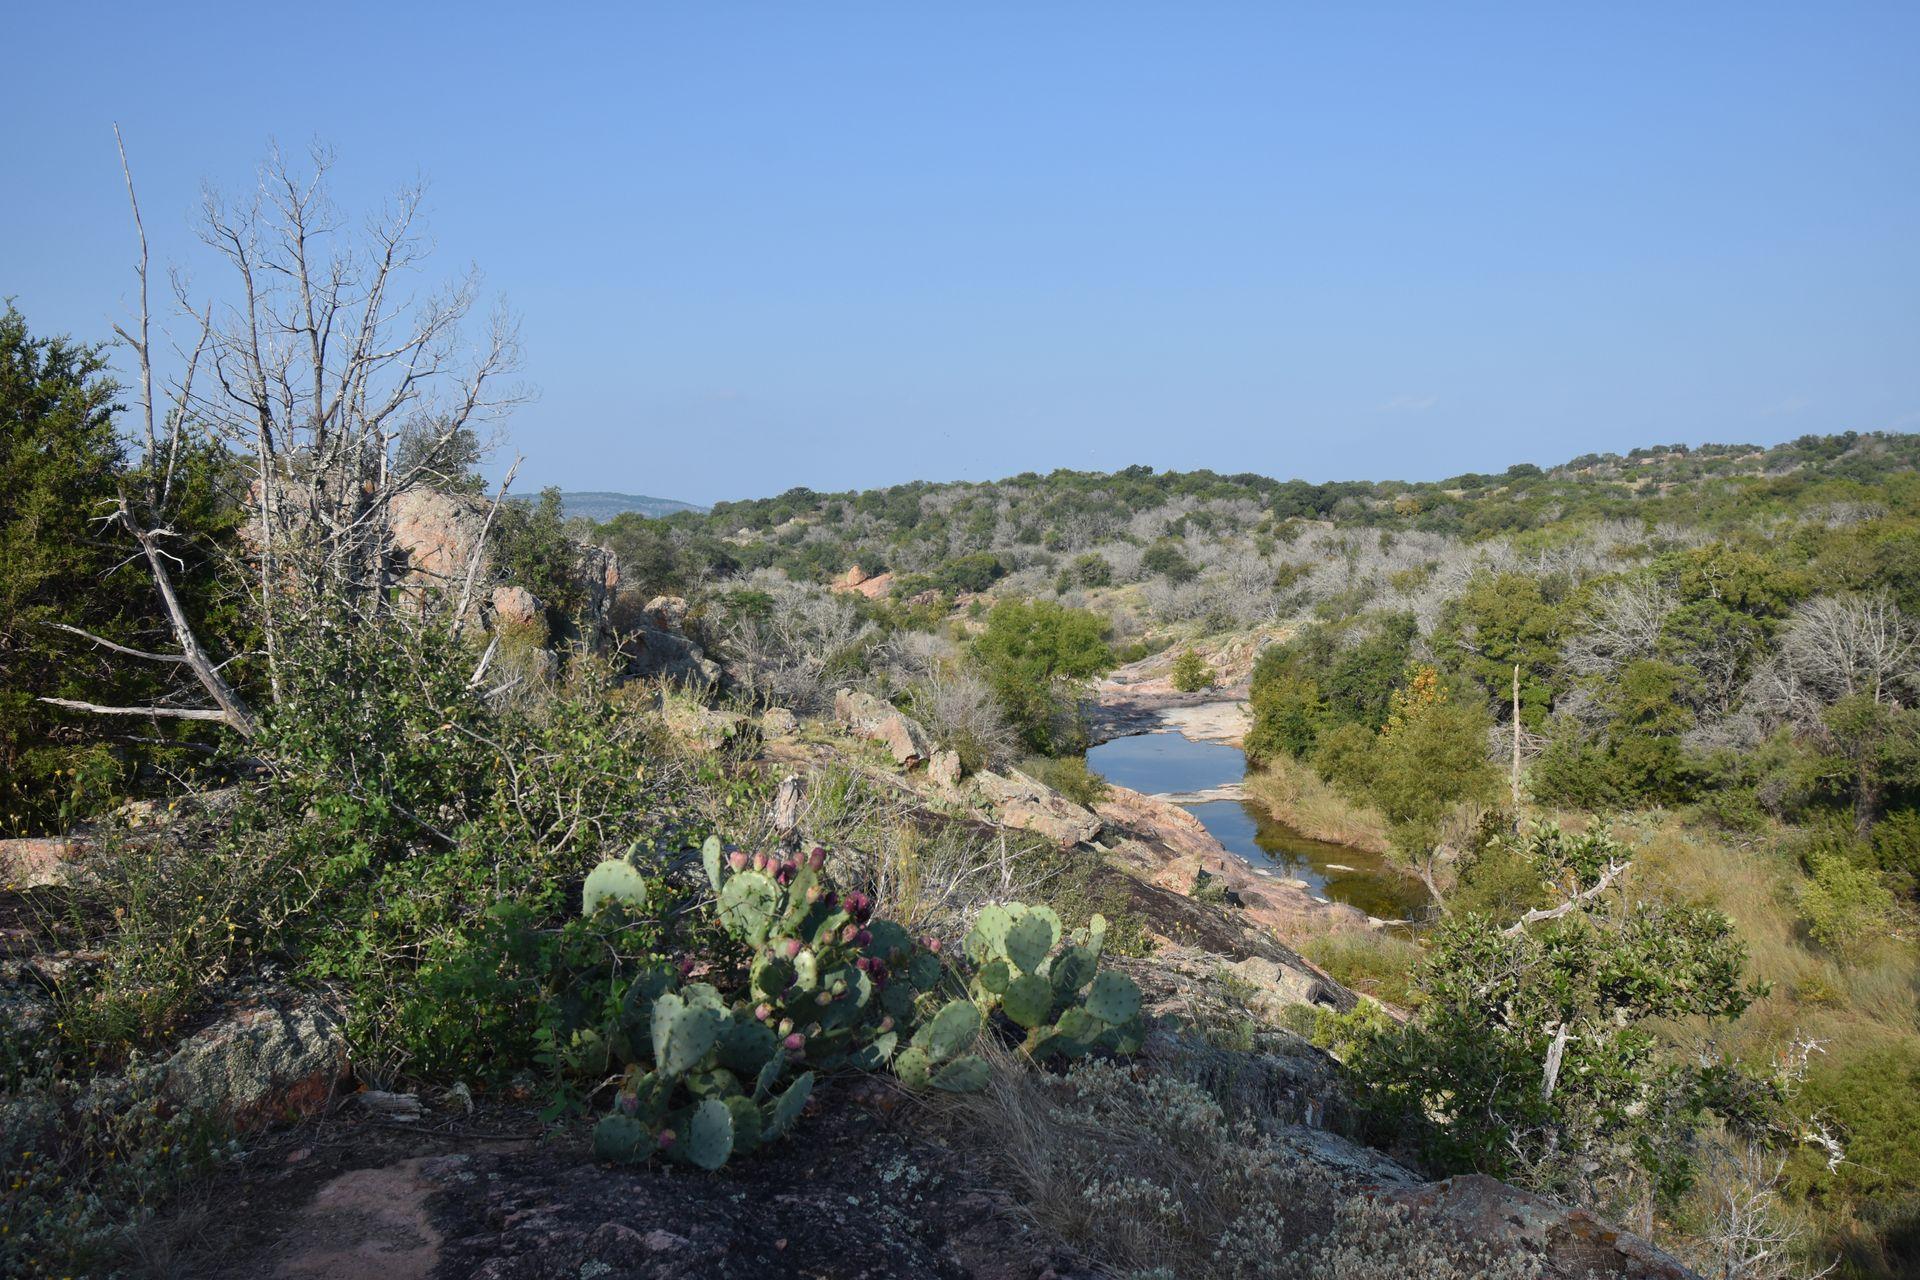 An overlook at Inks Lake State Park with a view of the desert, water and cacti.